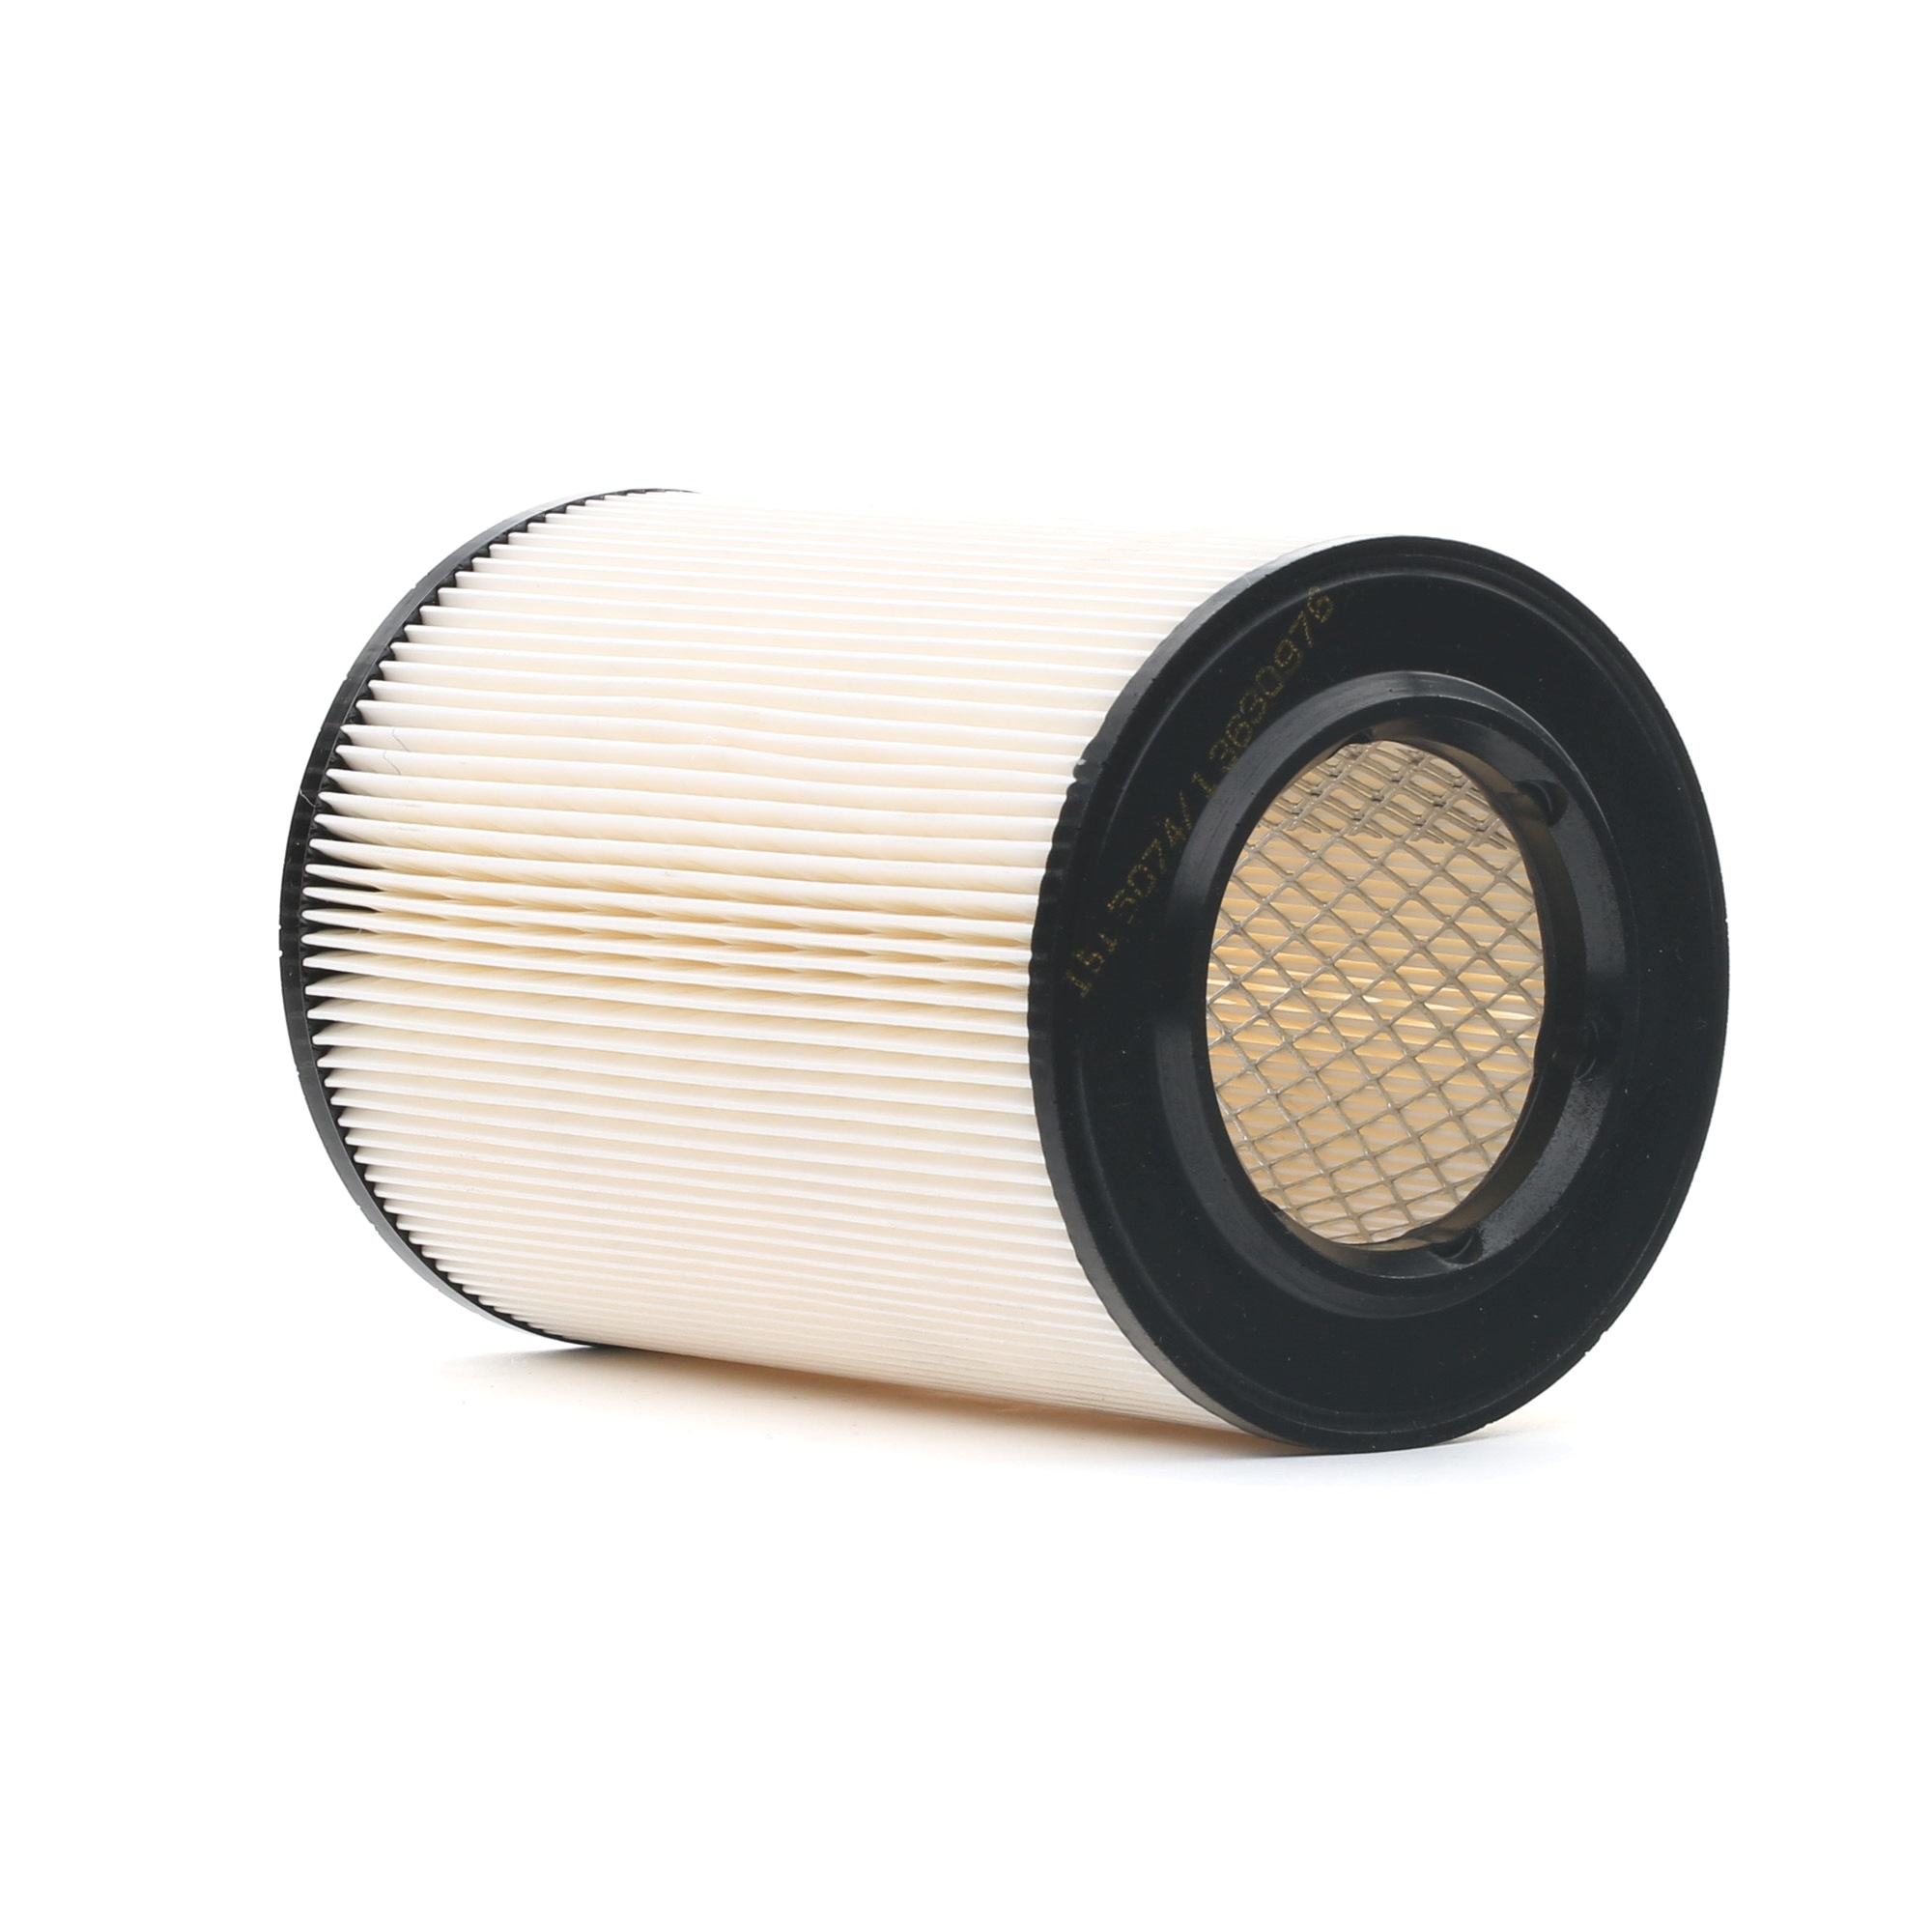 RIDEX 173mm, 125mm, Air Recirculation Filter, Filter Insert, Centrifuge, with cover mesh Height: 173mm Engine air filter 8A0551 buy